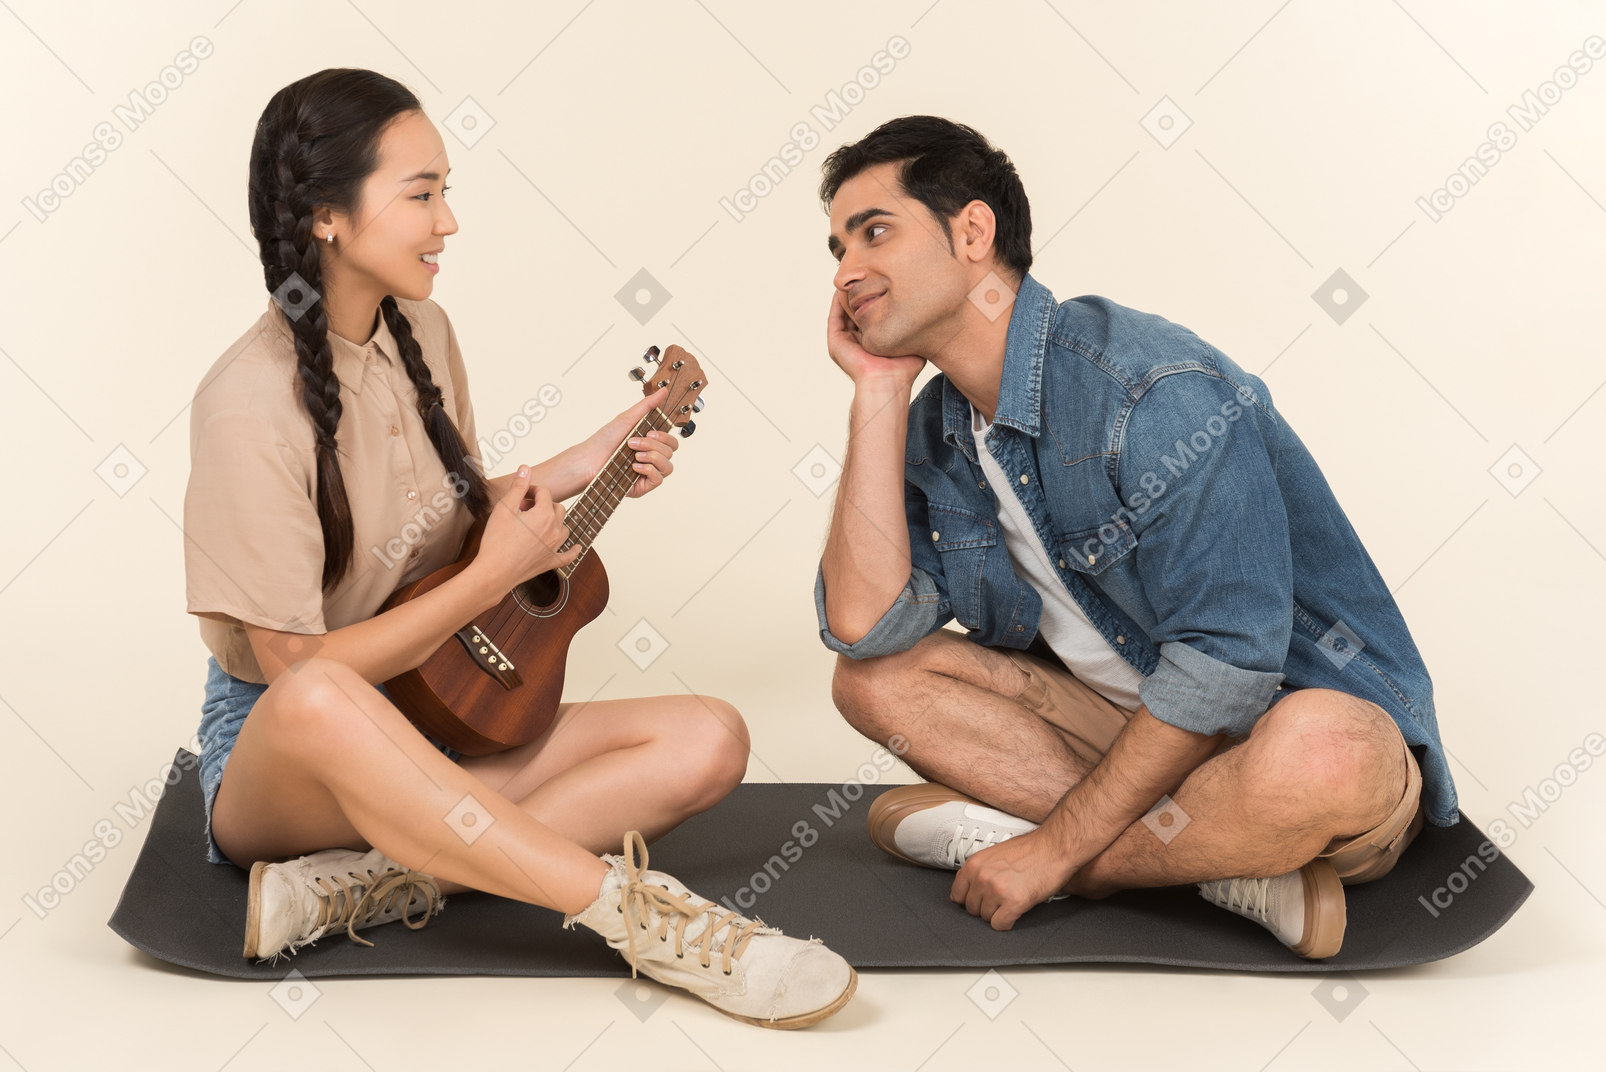 Young asian woman playing her guitar and young man is enchanted by her